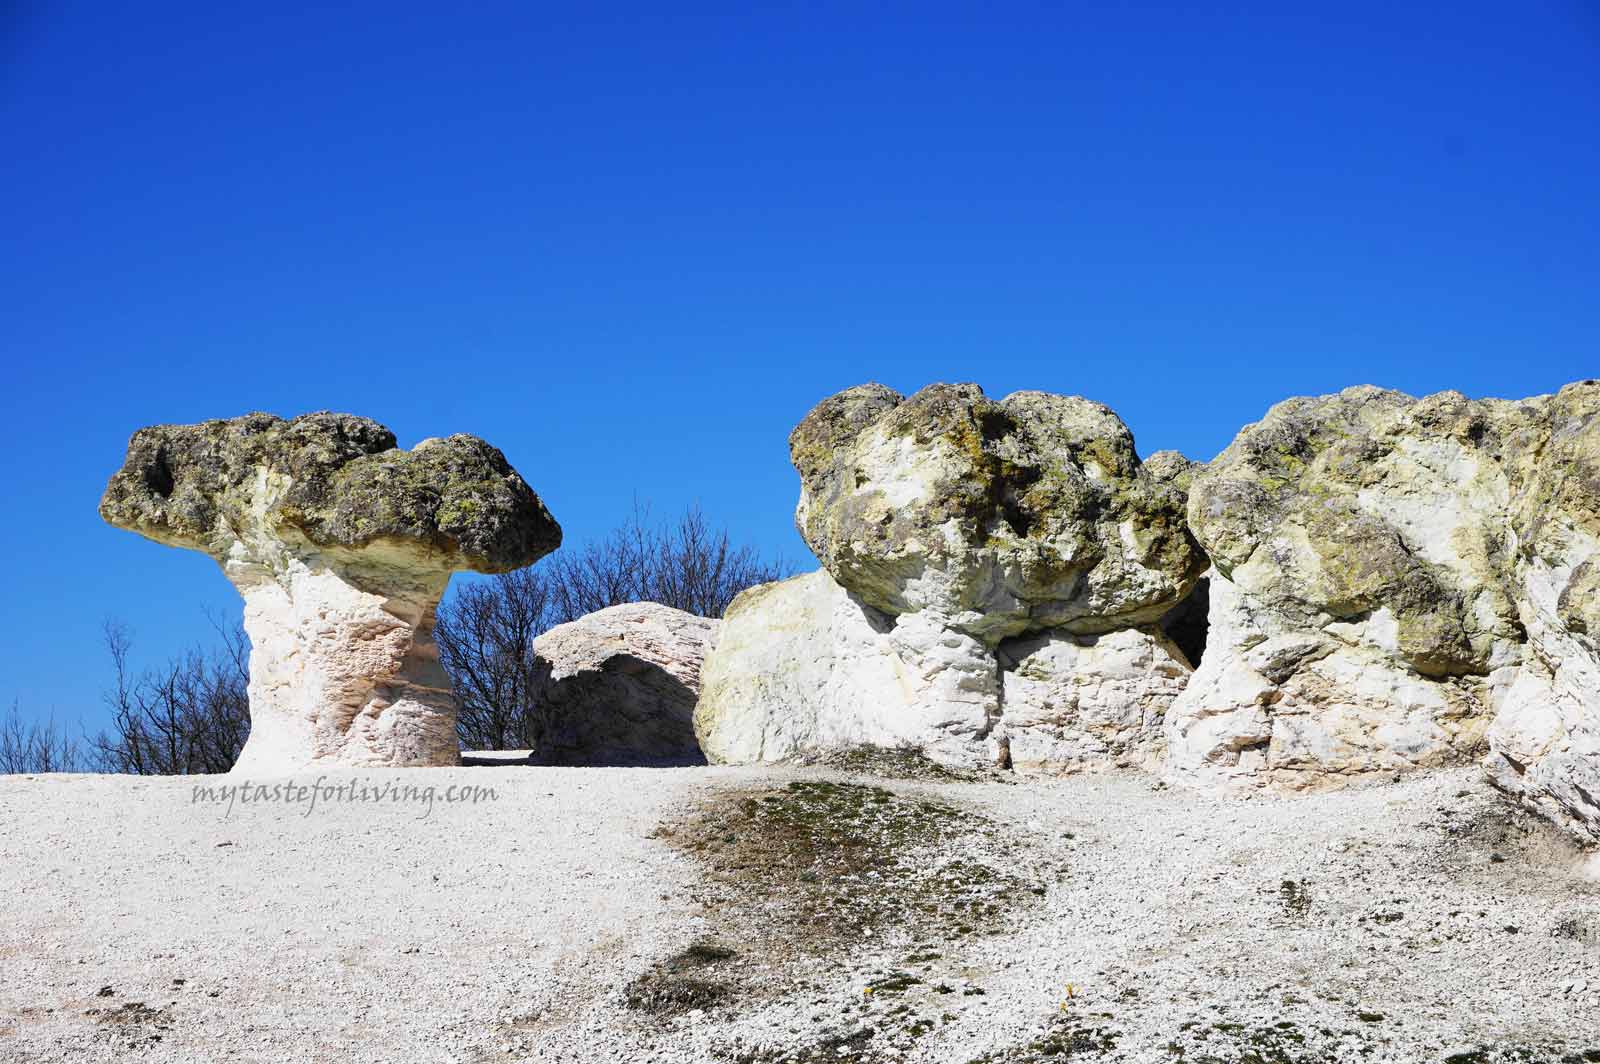 The natural phenomenon Stone Mushrooms is a landmark that is worth visiting if you pass near the village of Beli Plast (which is located next to the road Haskovo-Kardzhali). They are also known as Rock Mushrooms, and the locals call them Mantarkaya.